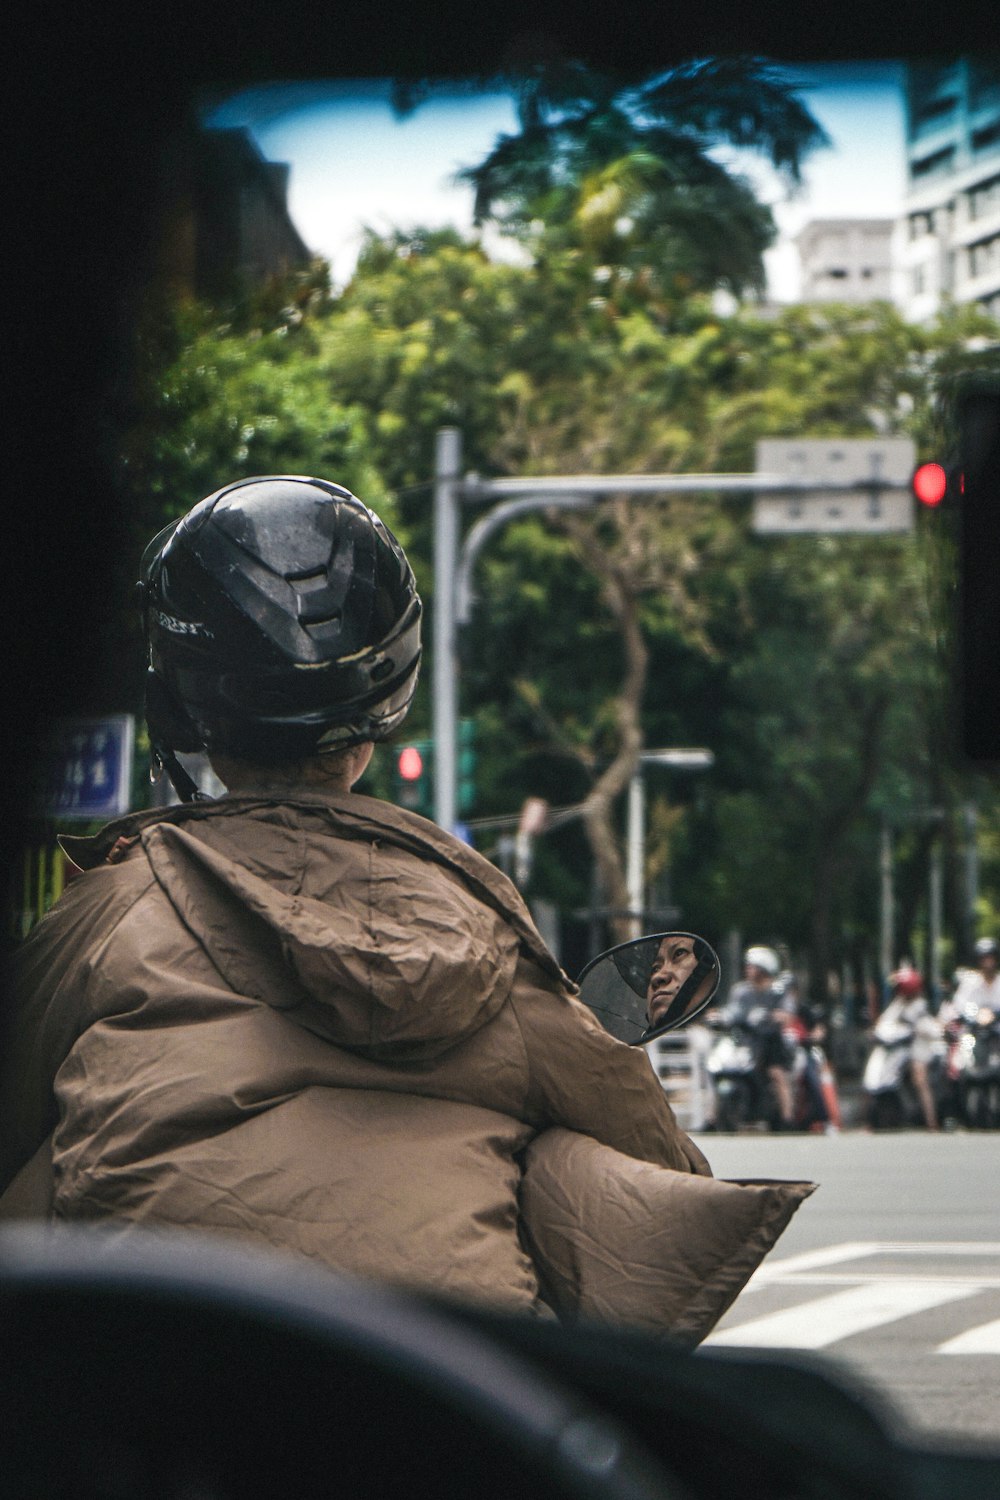 selective focus photography of person riding motorcycle near road during daytime